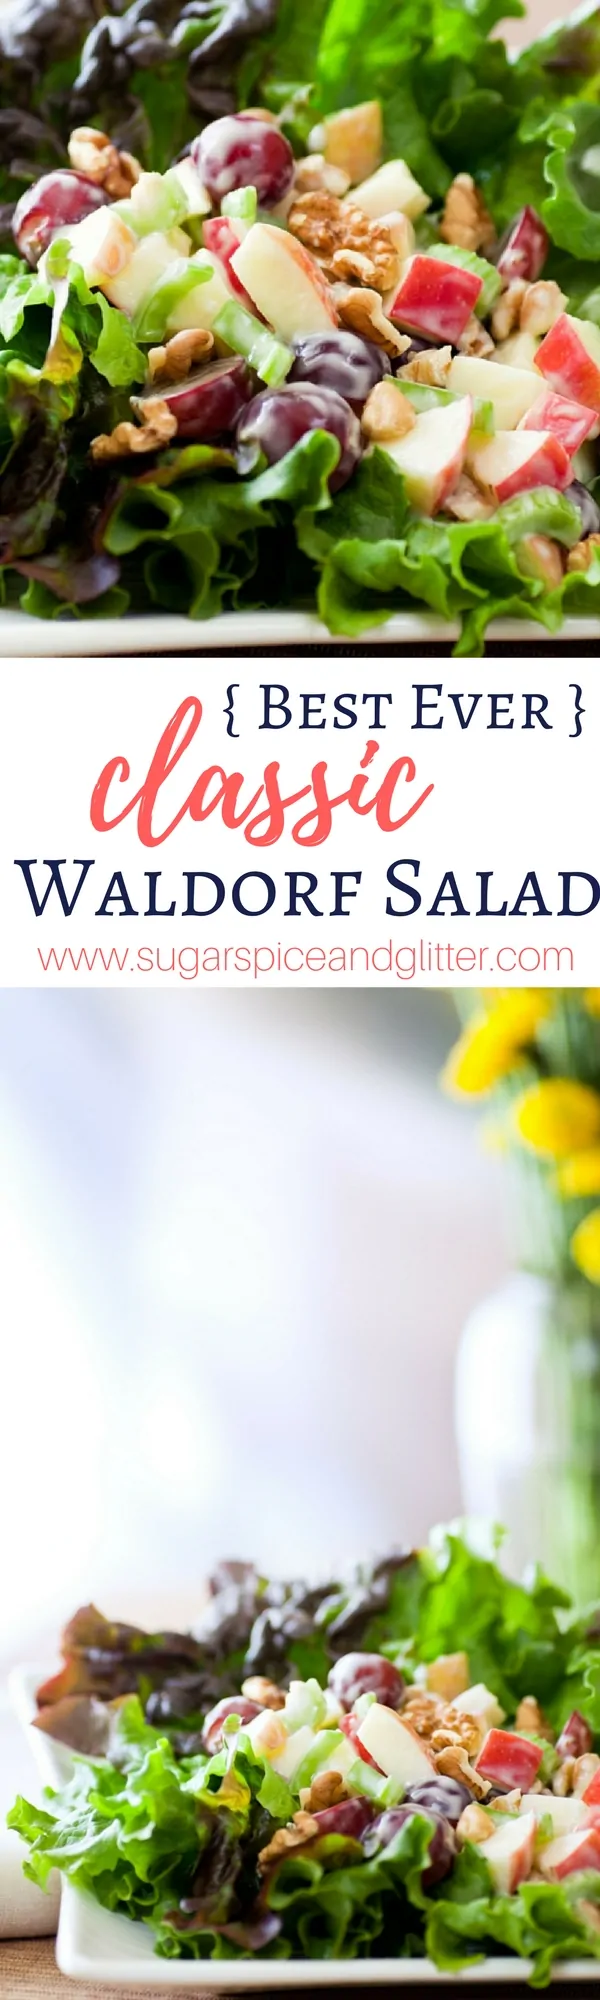 Clasic Waldorf Salad Recipe with fresh grape, apple, celery and walnut topping and a lightened up yogurt salad dressing